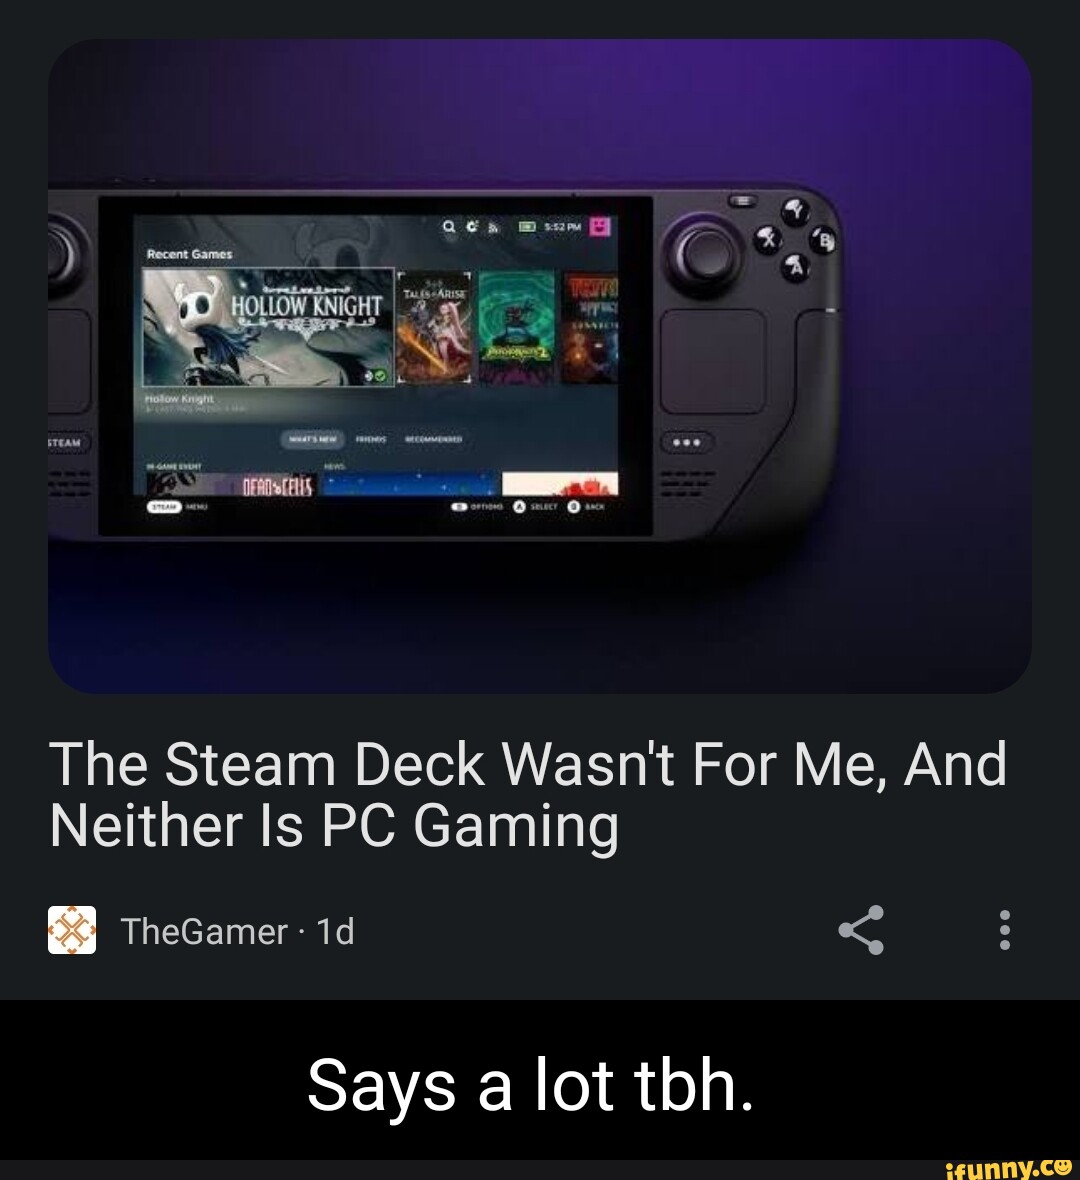 The Steam Deck Wasn't For Me, And Neither Is PC Gaming